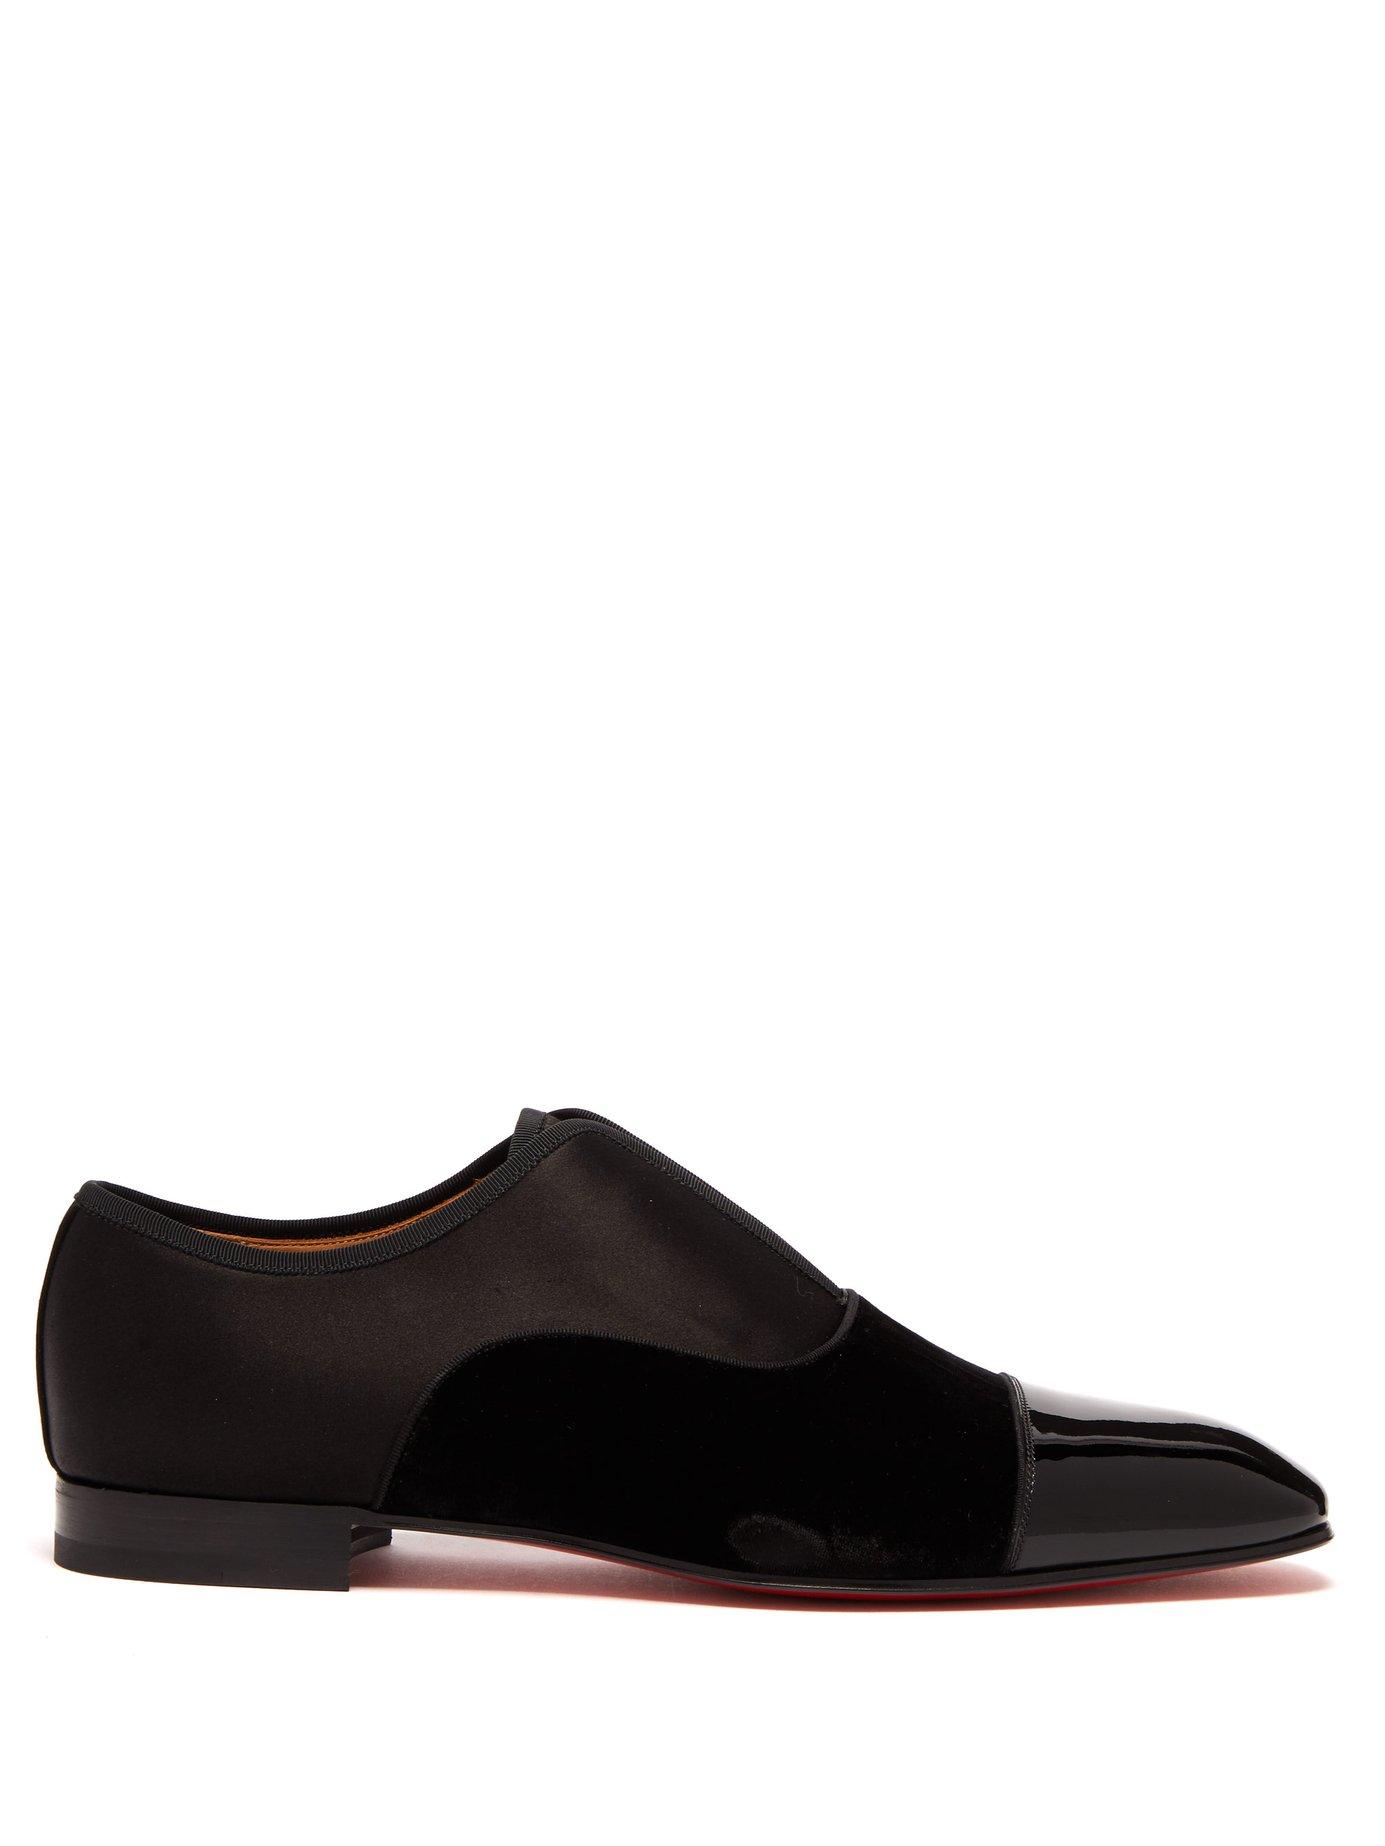 Christian Louboutin Alpha Male Satin And Patent Leather Dress Shoes in  Black for Men